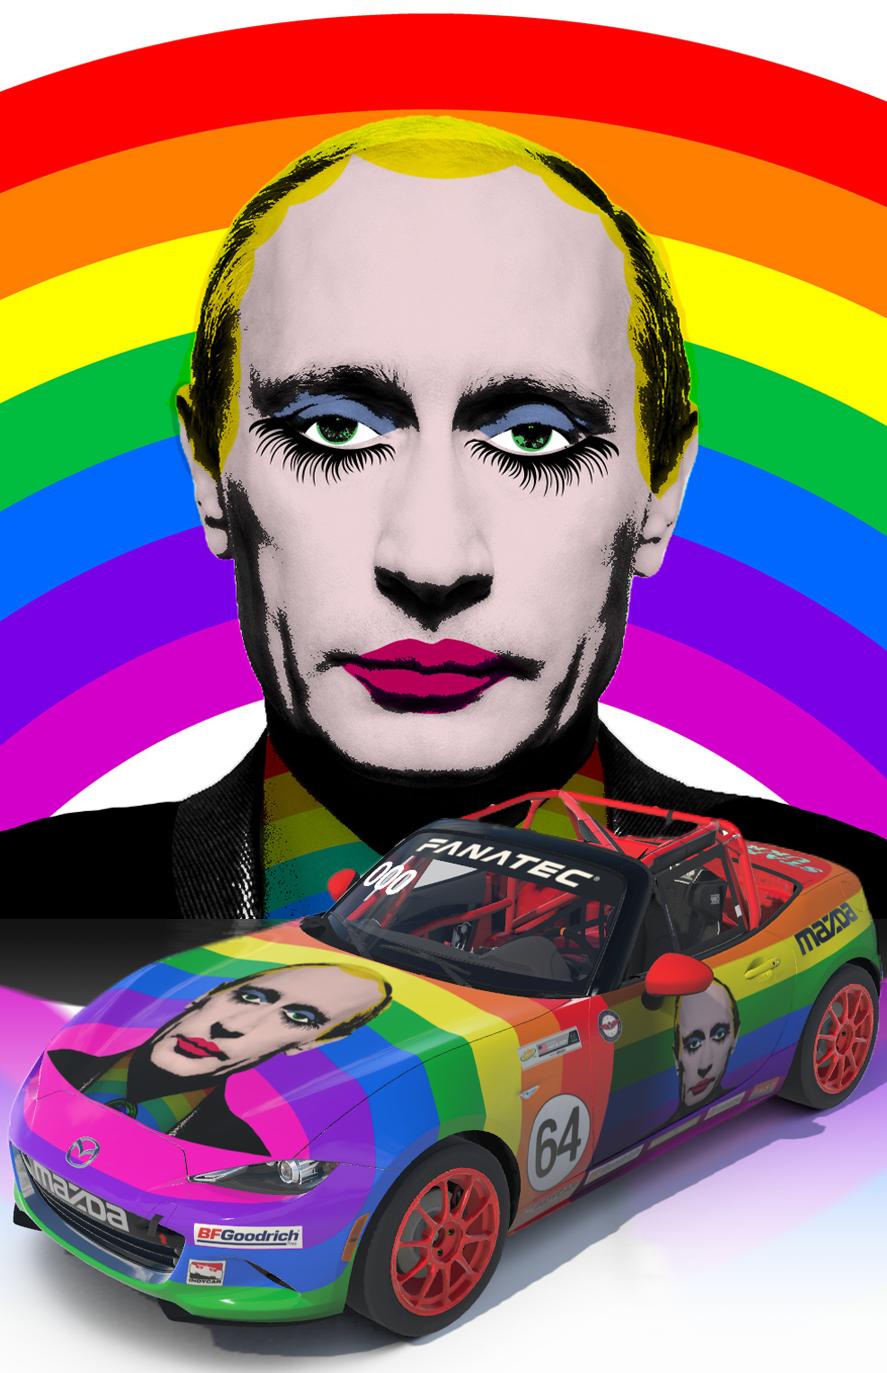 Preview of Putins Pride by Carson C.